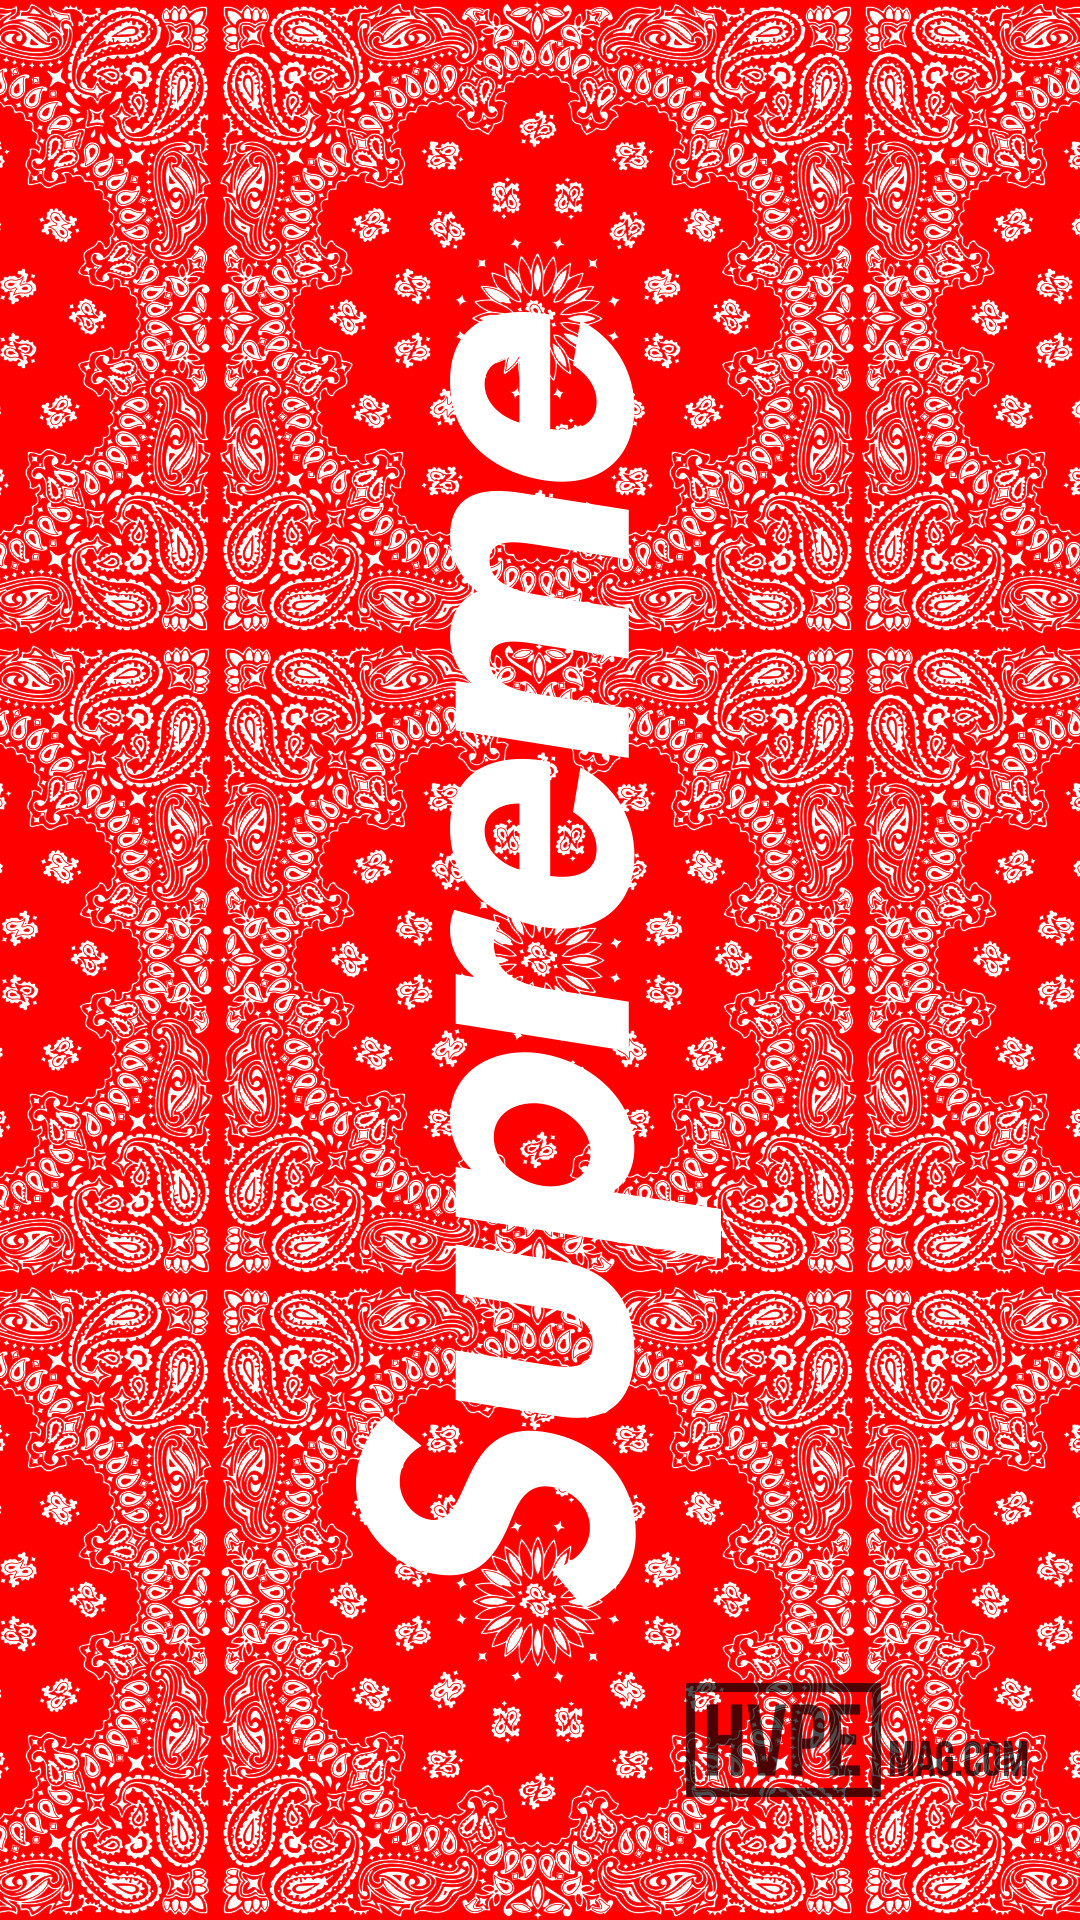 750x1334 Supreme And Gucci Wallpapers - Wallpaper Cave  Supreme wallpaper, Gucci  wallpaper iphone, Supreme iphone wallpaper